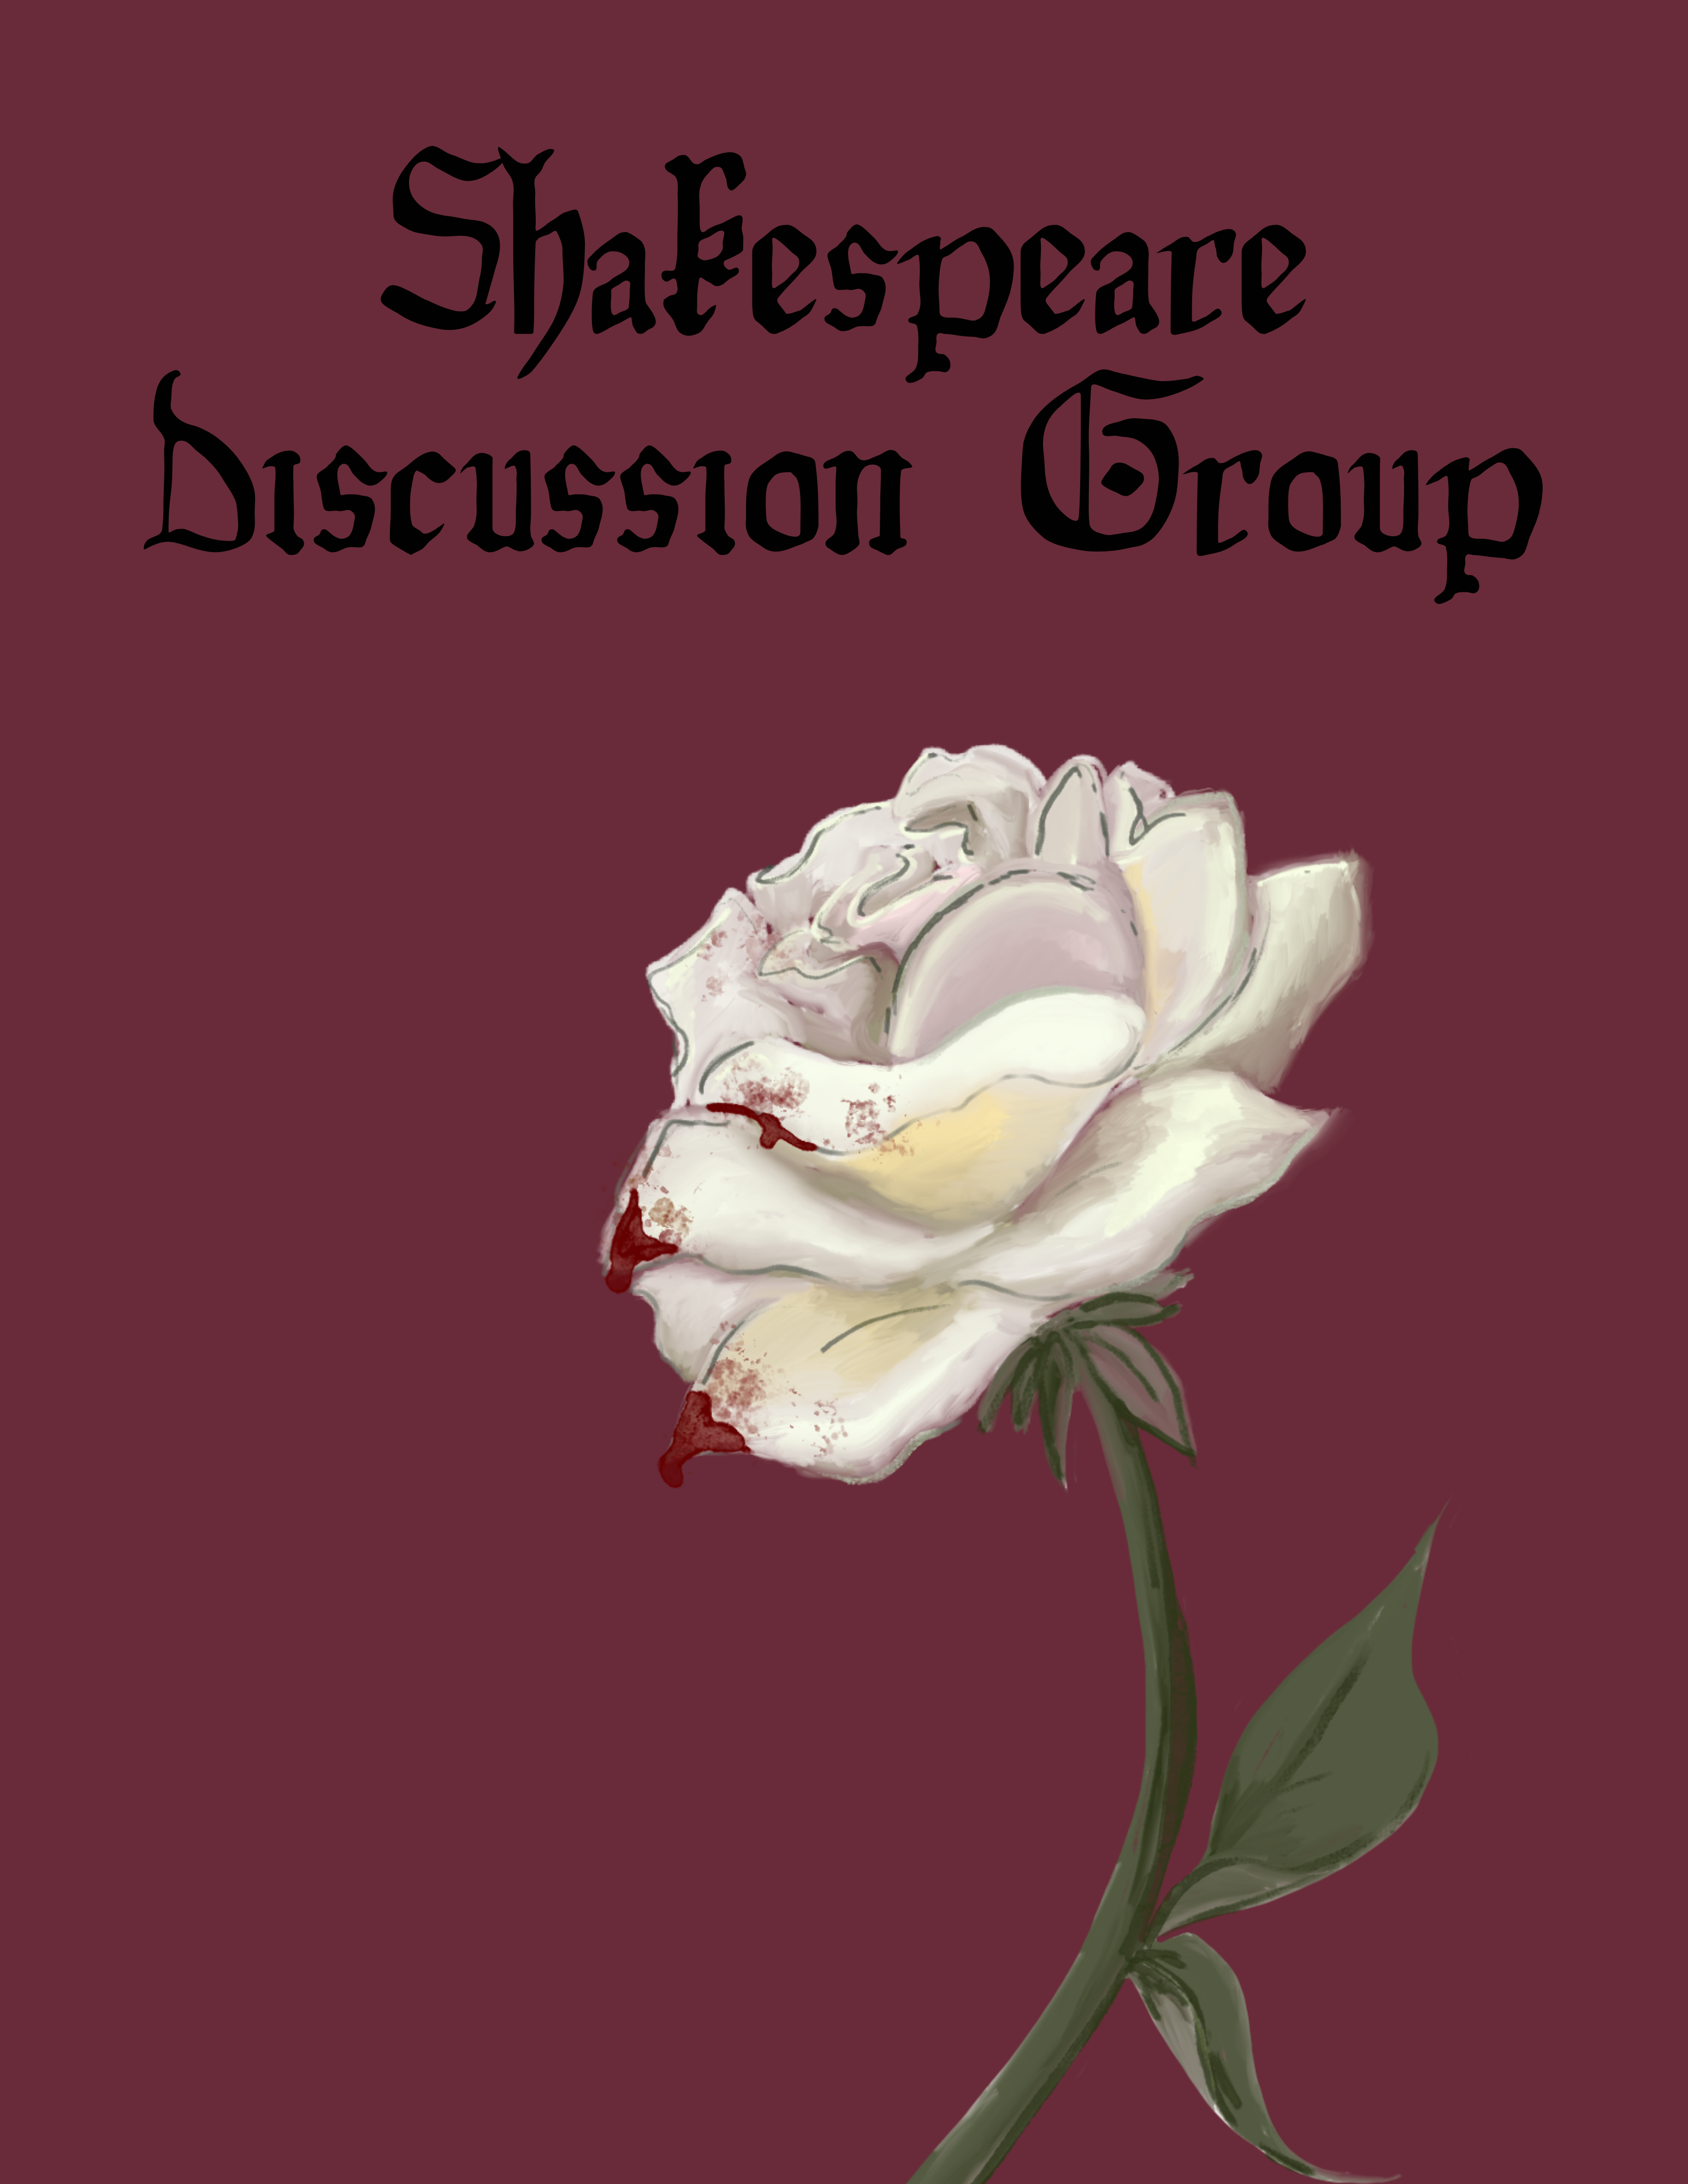 Shakespeare Discussion Group White Rose with Blood Drops on Petals